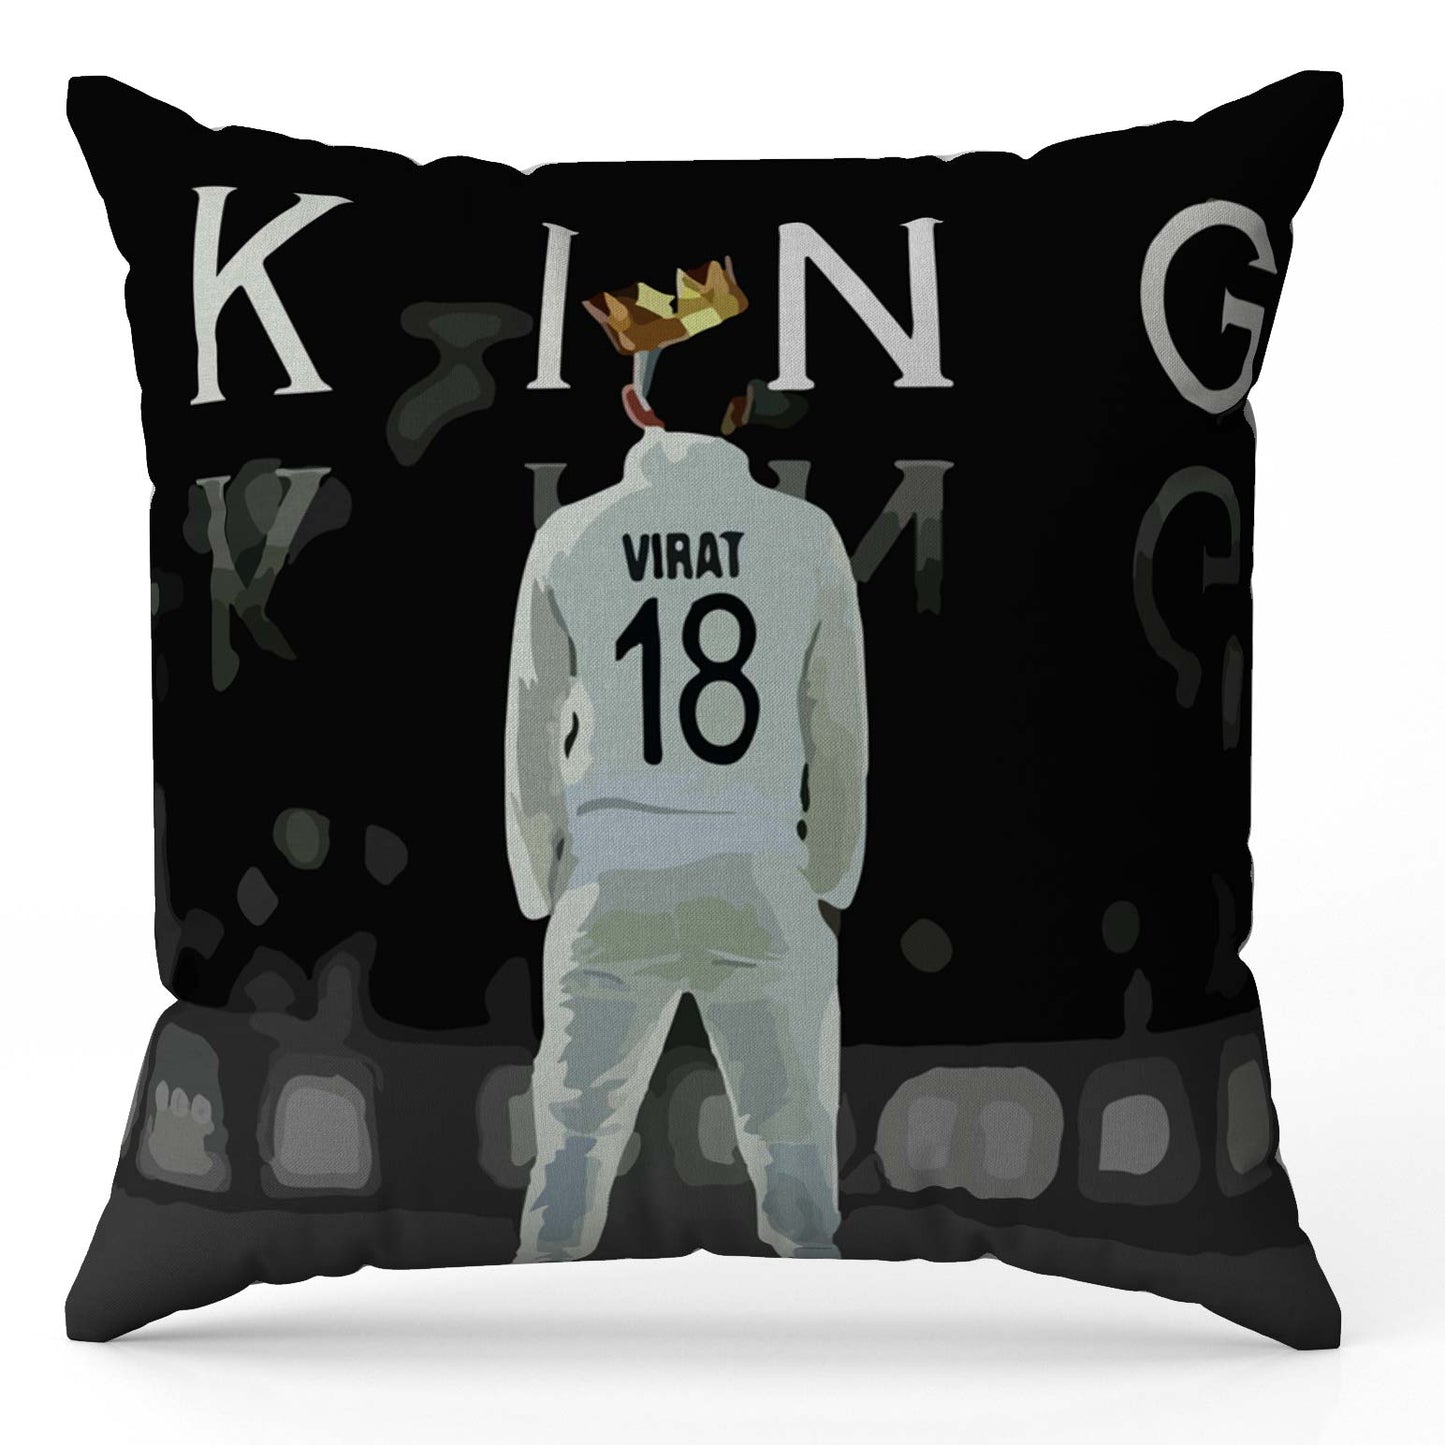 Virat in Style Cushion Cover Trendy Home